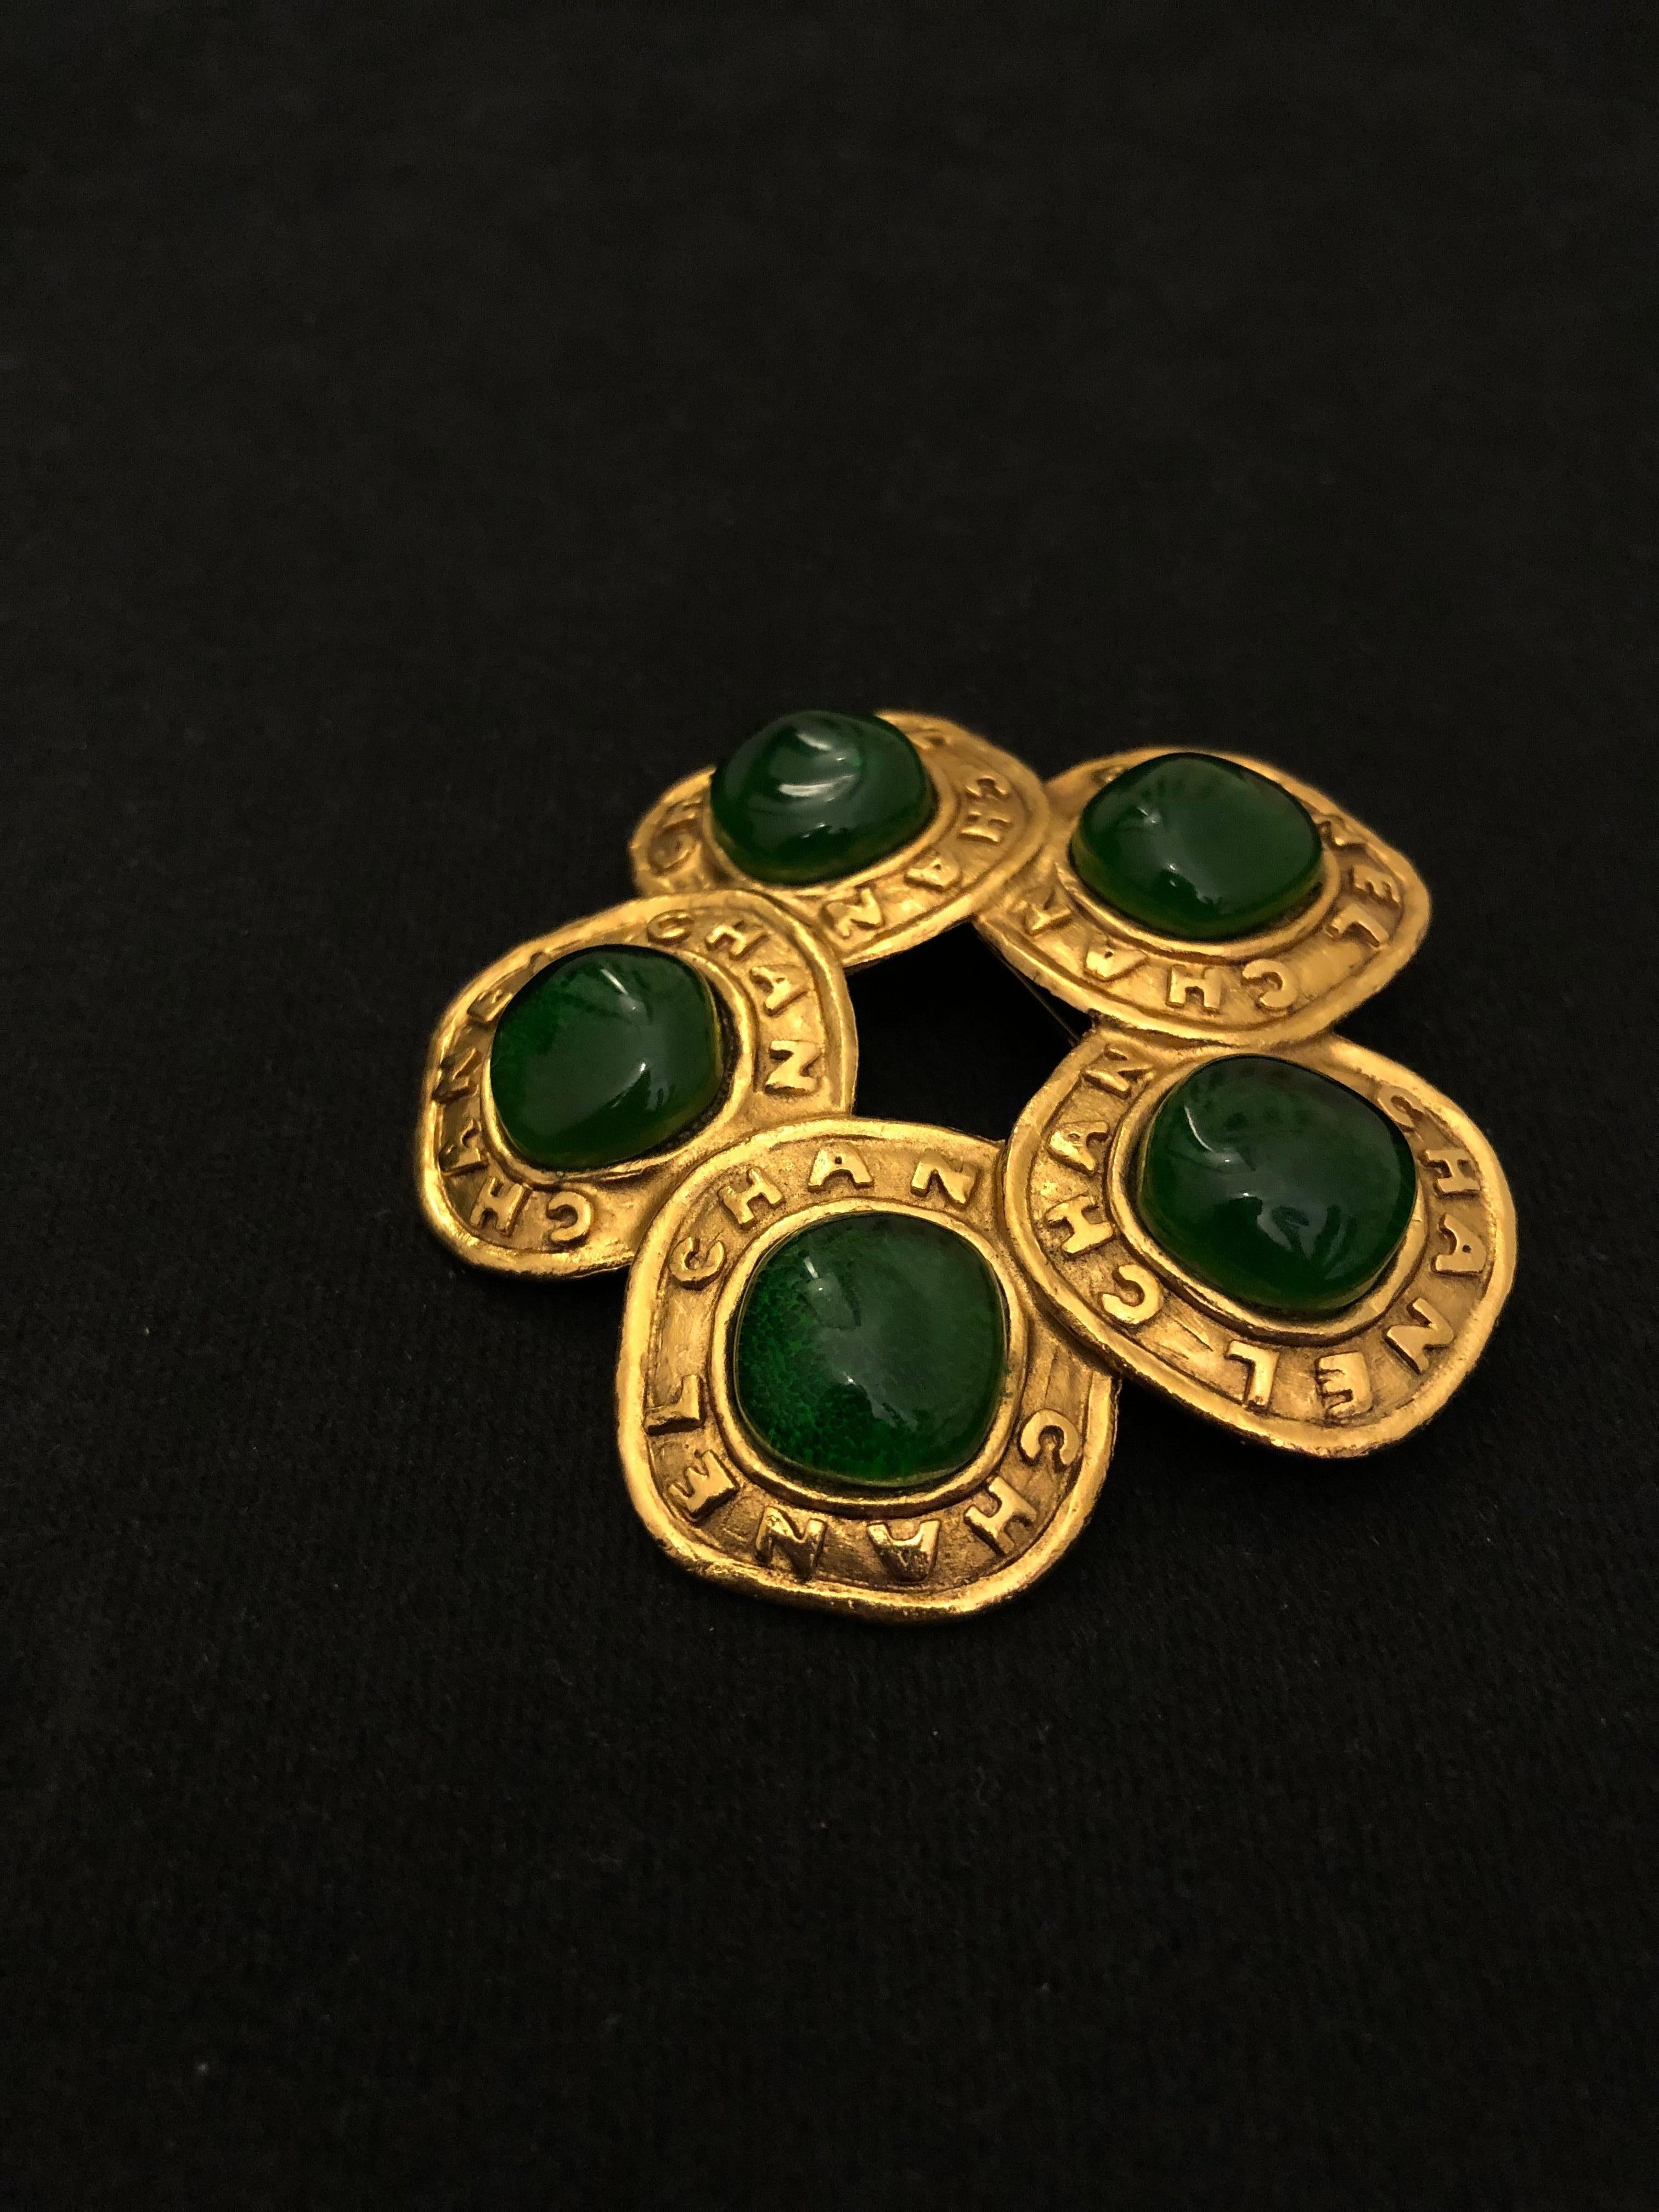 1980s Chanel gold toned brooch featuring five green colored gripoix surrounded by gold toned CHANEL letter frames. Stamped CHANEL 2 6 made in France. Measures approximately 6.2 x 6 cm. Comes with box. 

Condition: Minor signs of wear. Generally in